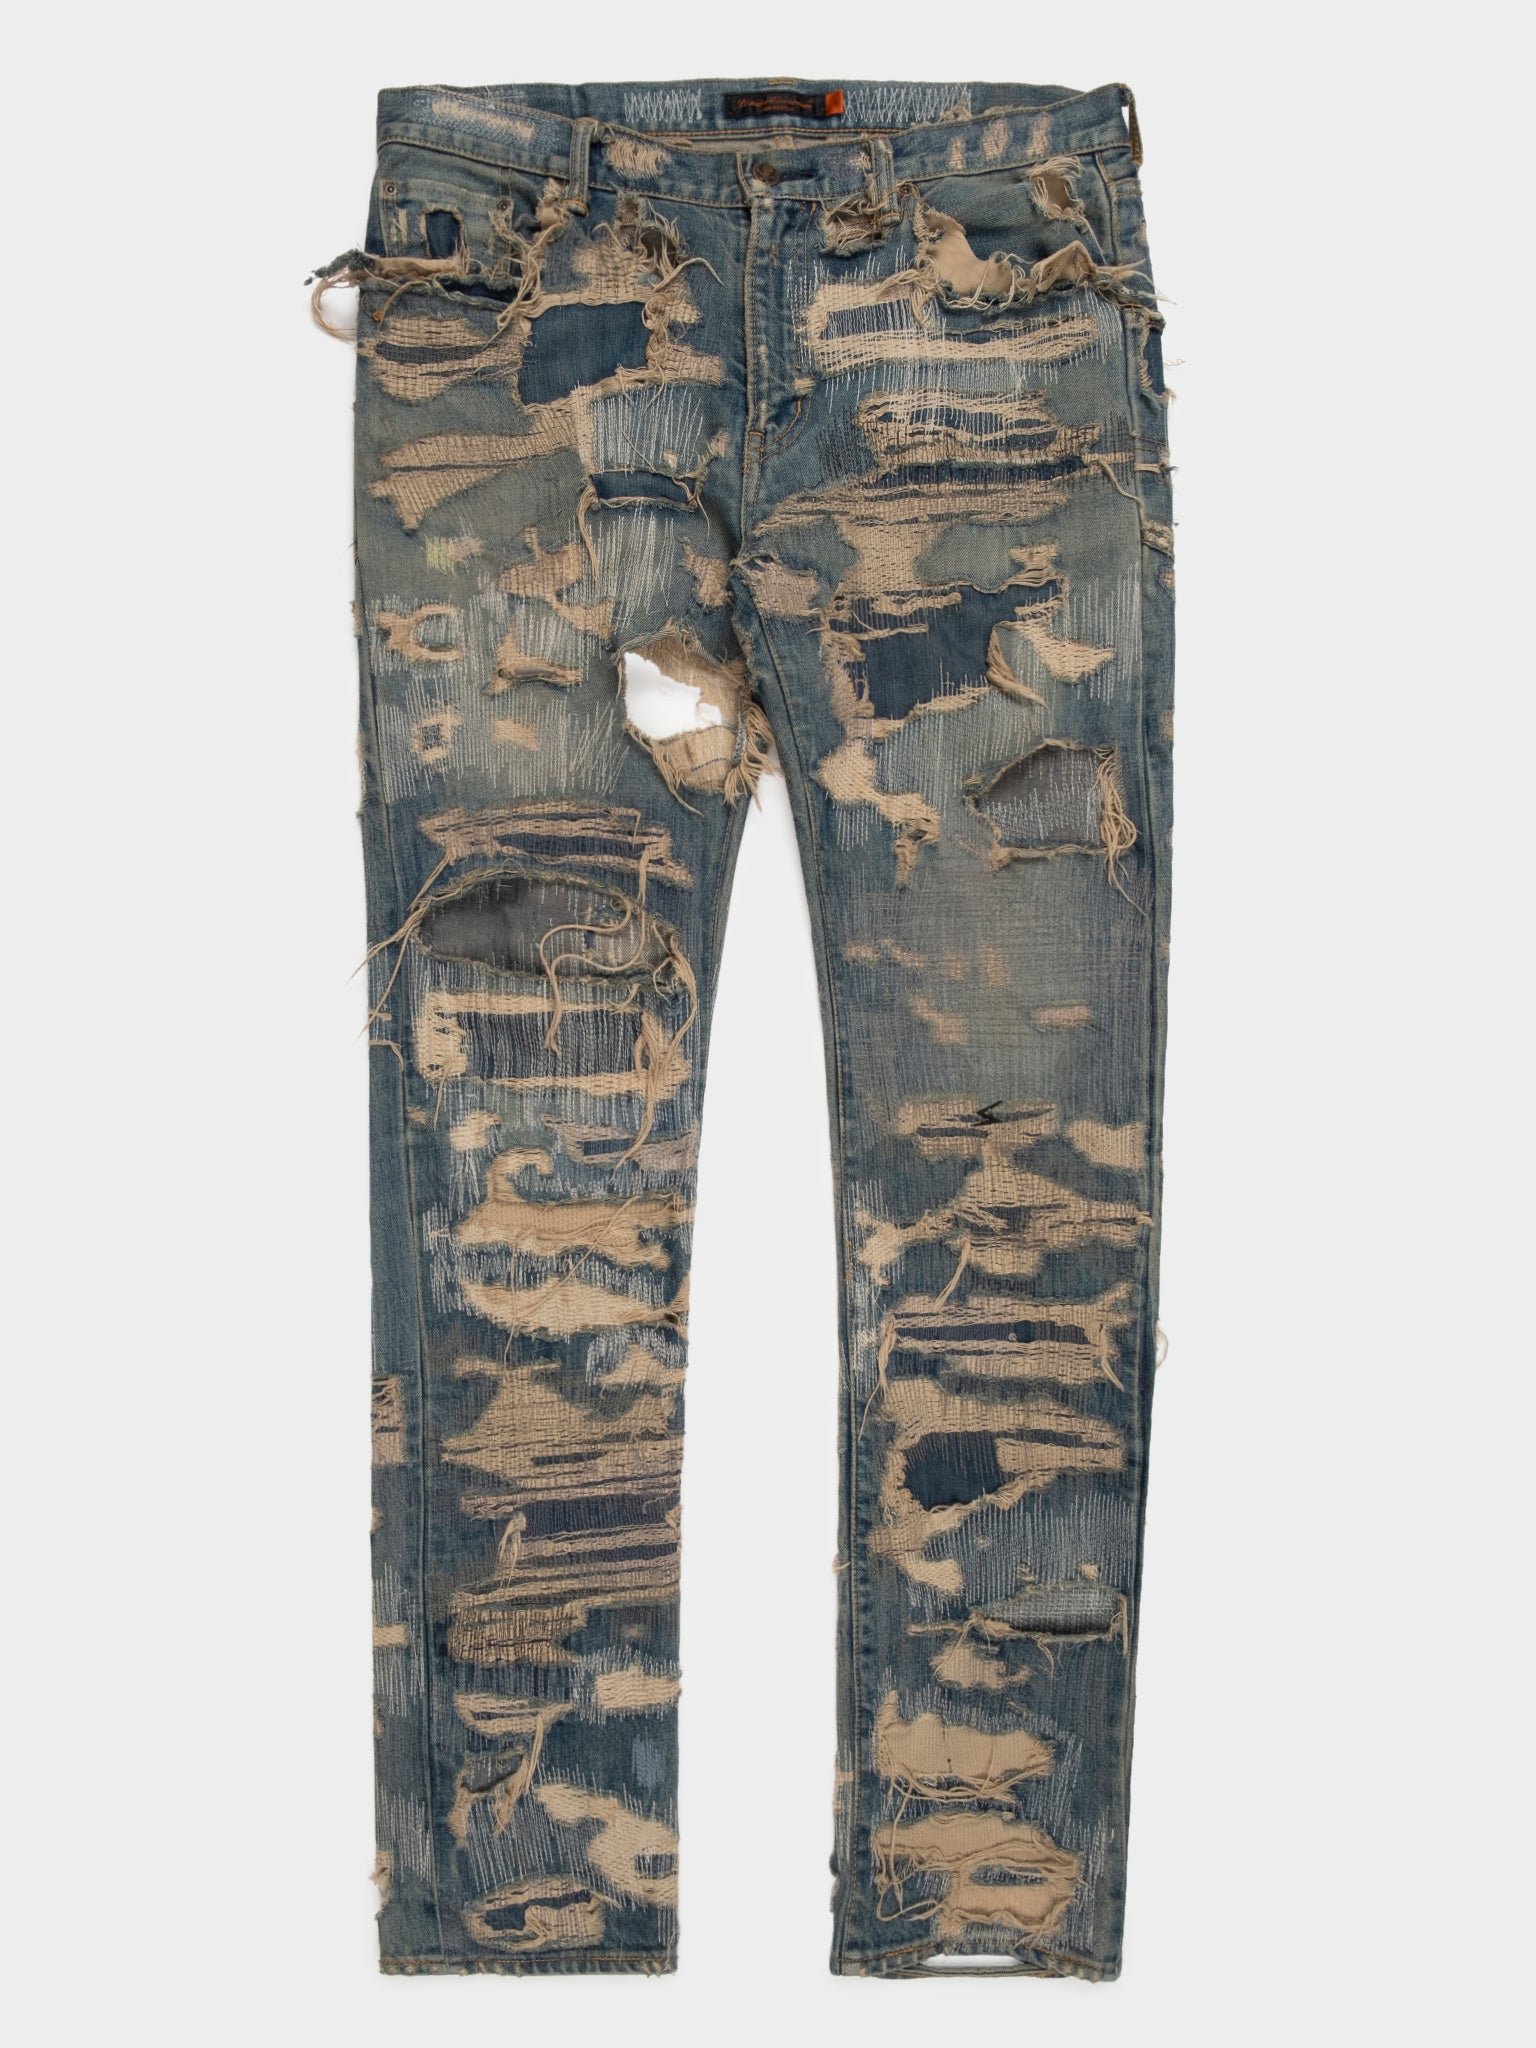 Buy Undercover 'Arts and Crafts' 85 Jeans Online at Groupie